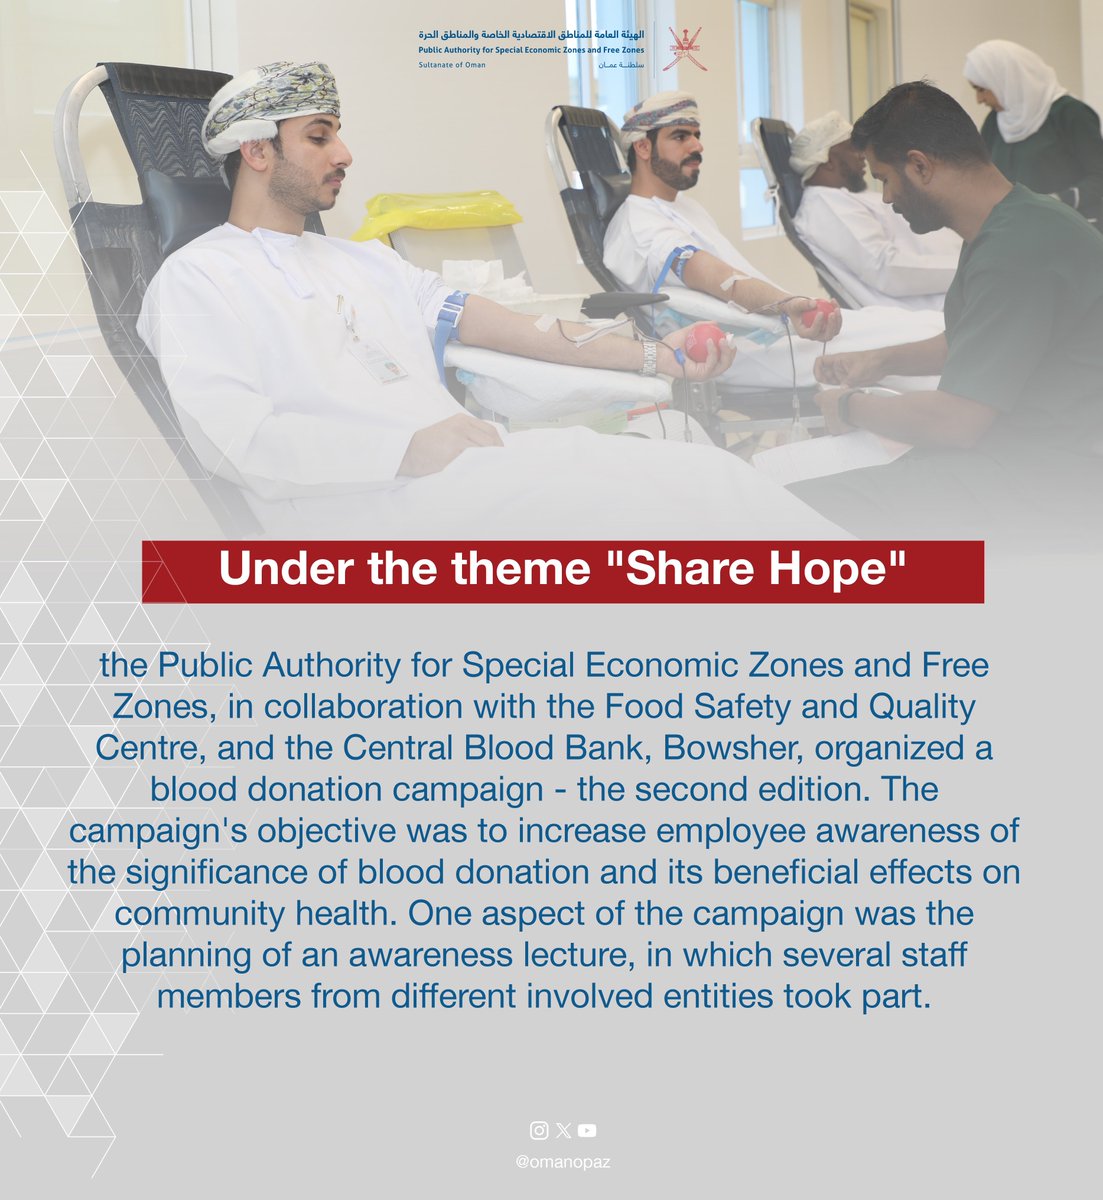 Under the theme '#Share_Hope',, the Public Authority for Special Economic Zones and Free Zones, in collaboration with the Food Safety and Quality Centre, and the Central Blood Bank, Bowsher, organized a blood donation campaign - the second edition. The campaign's objective was